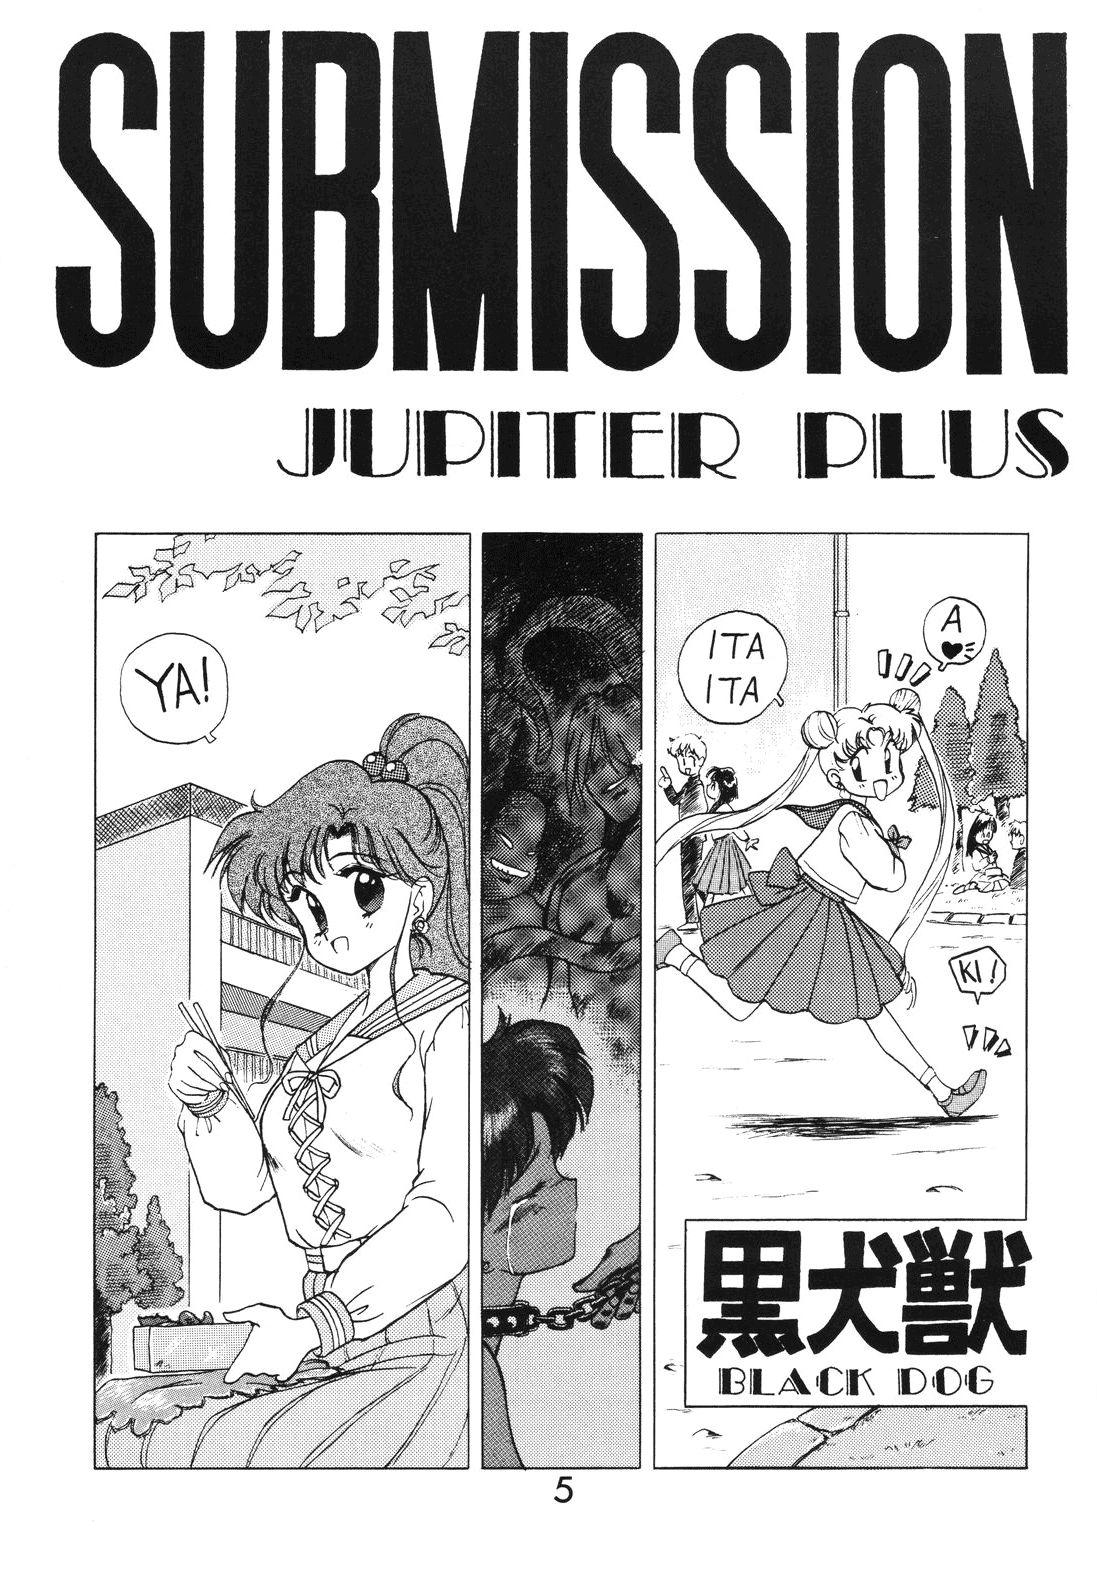 Round Ass SUBMISSION JUPITER PLUS - Sailor moon Hot Women Fucking - Page 5